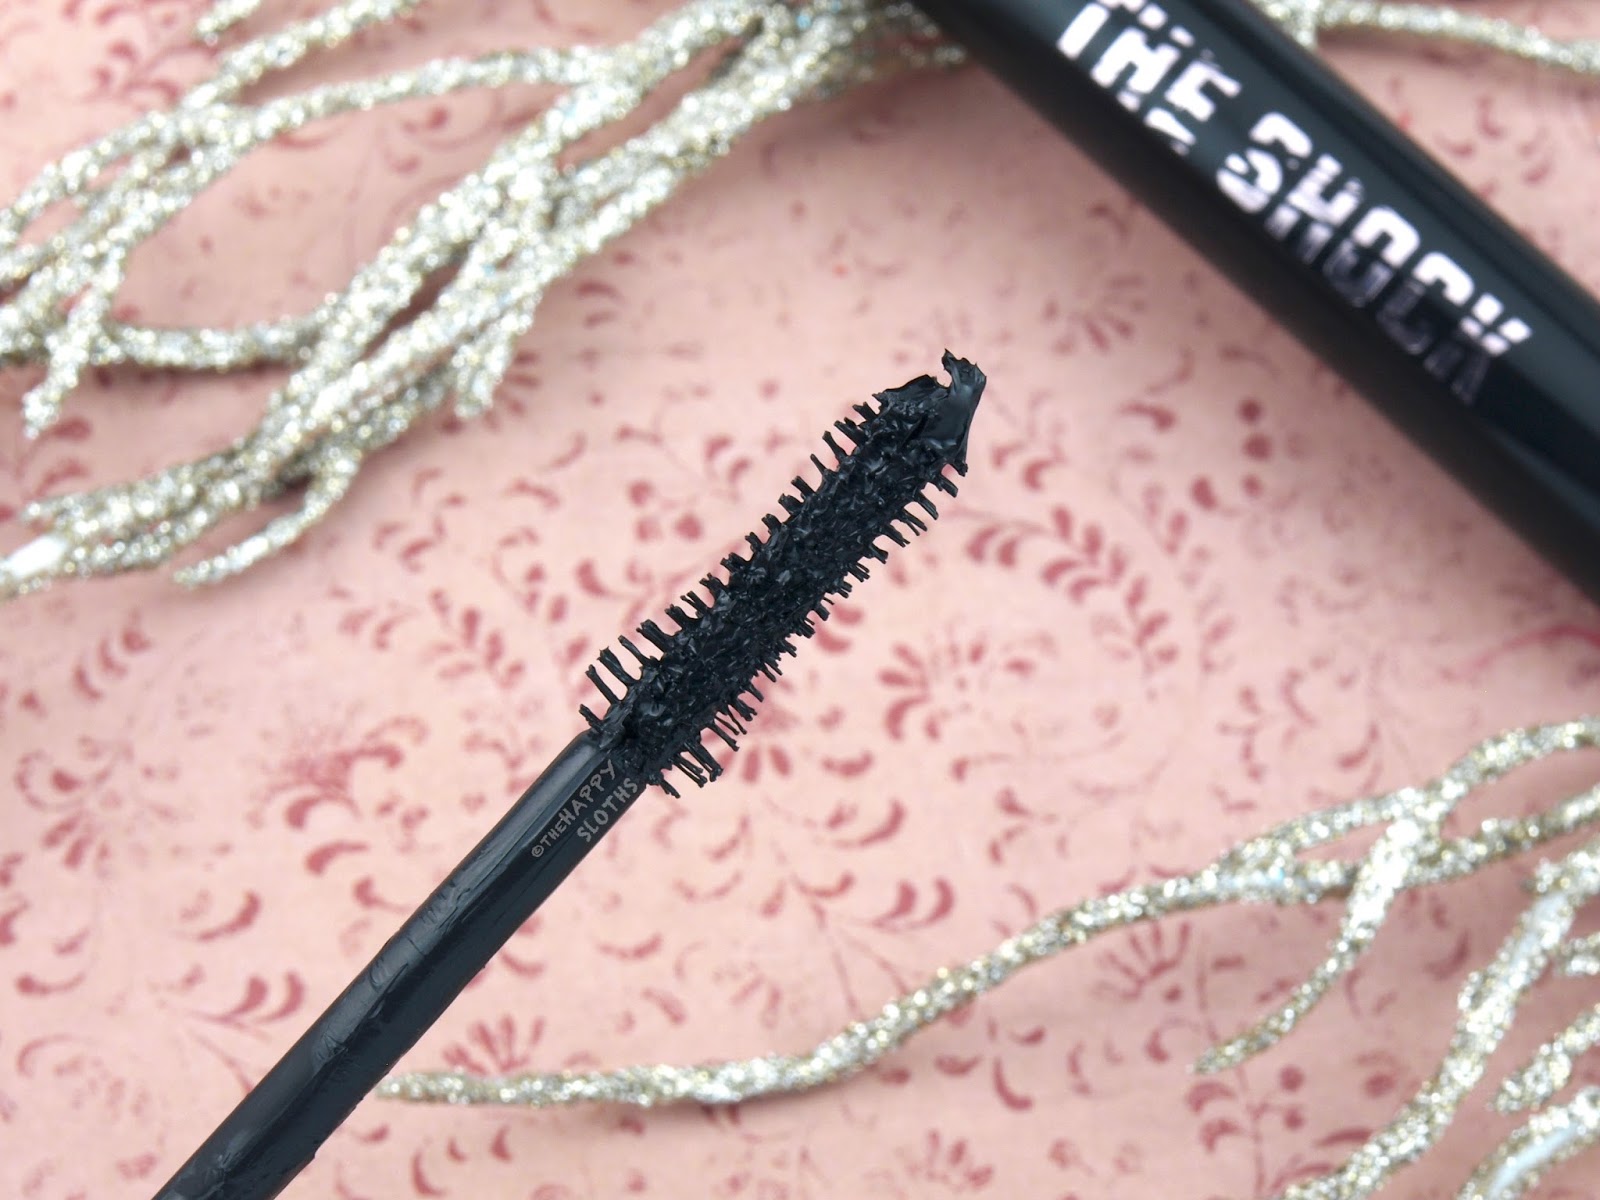 YSL The Shock Mascara review – ♡ Crybaby reviews ♡